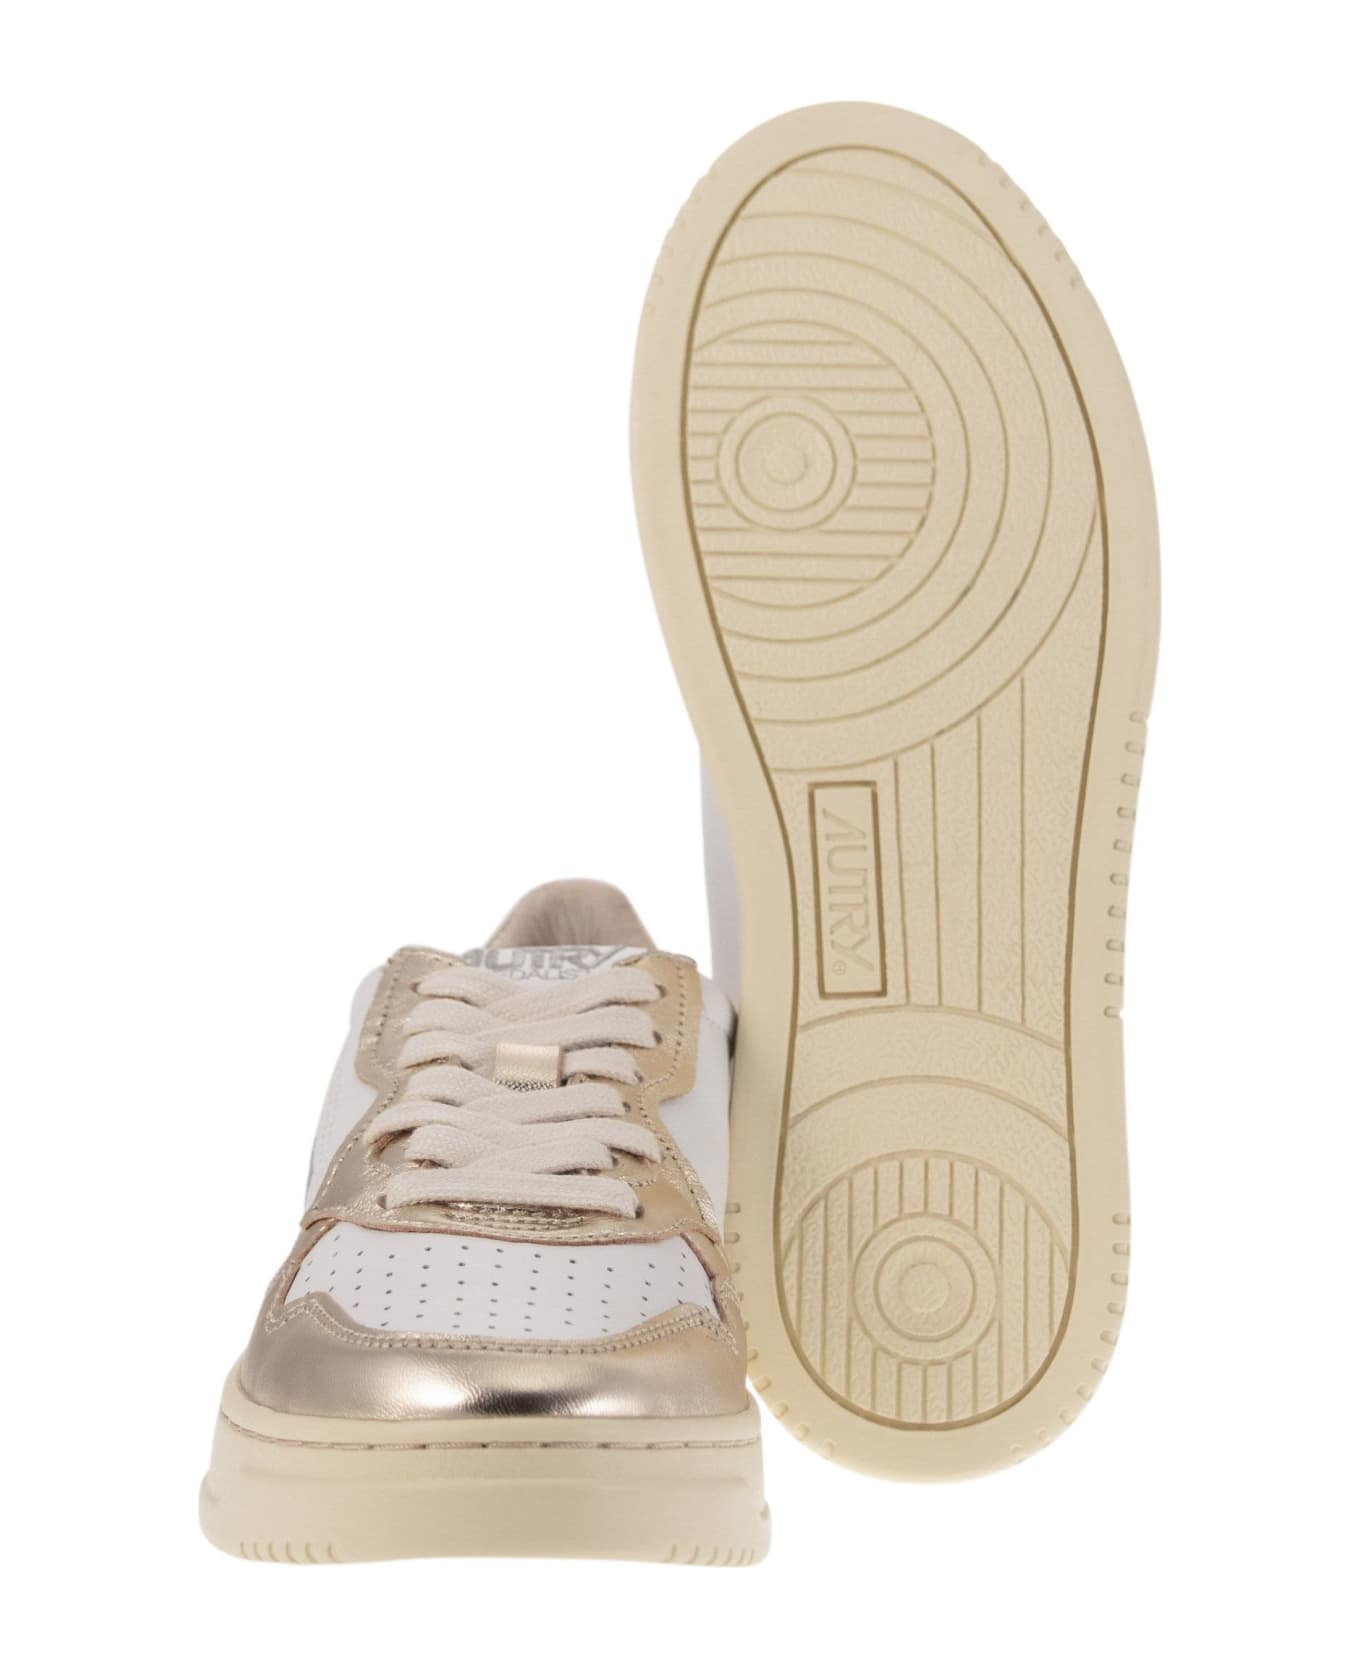 Autry Platinum And White Two-tone Leather Medalist Low Sneakers - Platino スニーカー